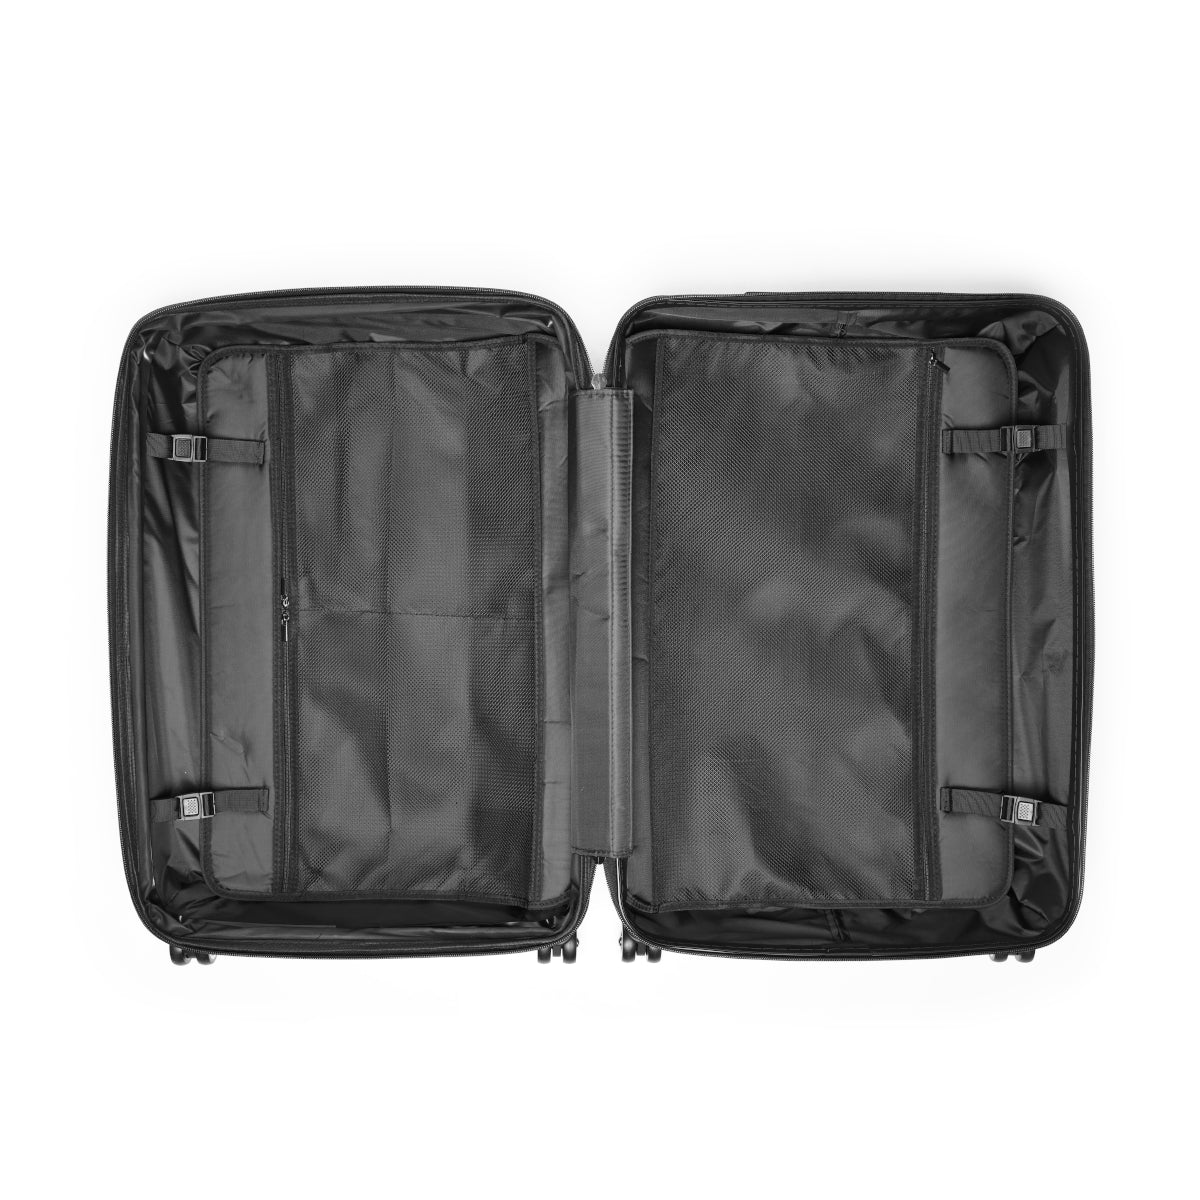 Getrott Bathsheba at Her Bath by Rembrandt Black Cabin Suitcase Inner Pockets Extended Storage Adjustable Telescopic Handle Inner Pockets Double wheeled Polycarbonate Hard-shell Built-in Lock